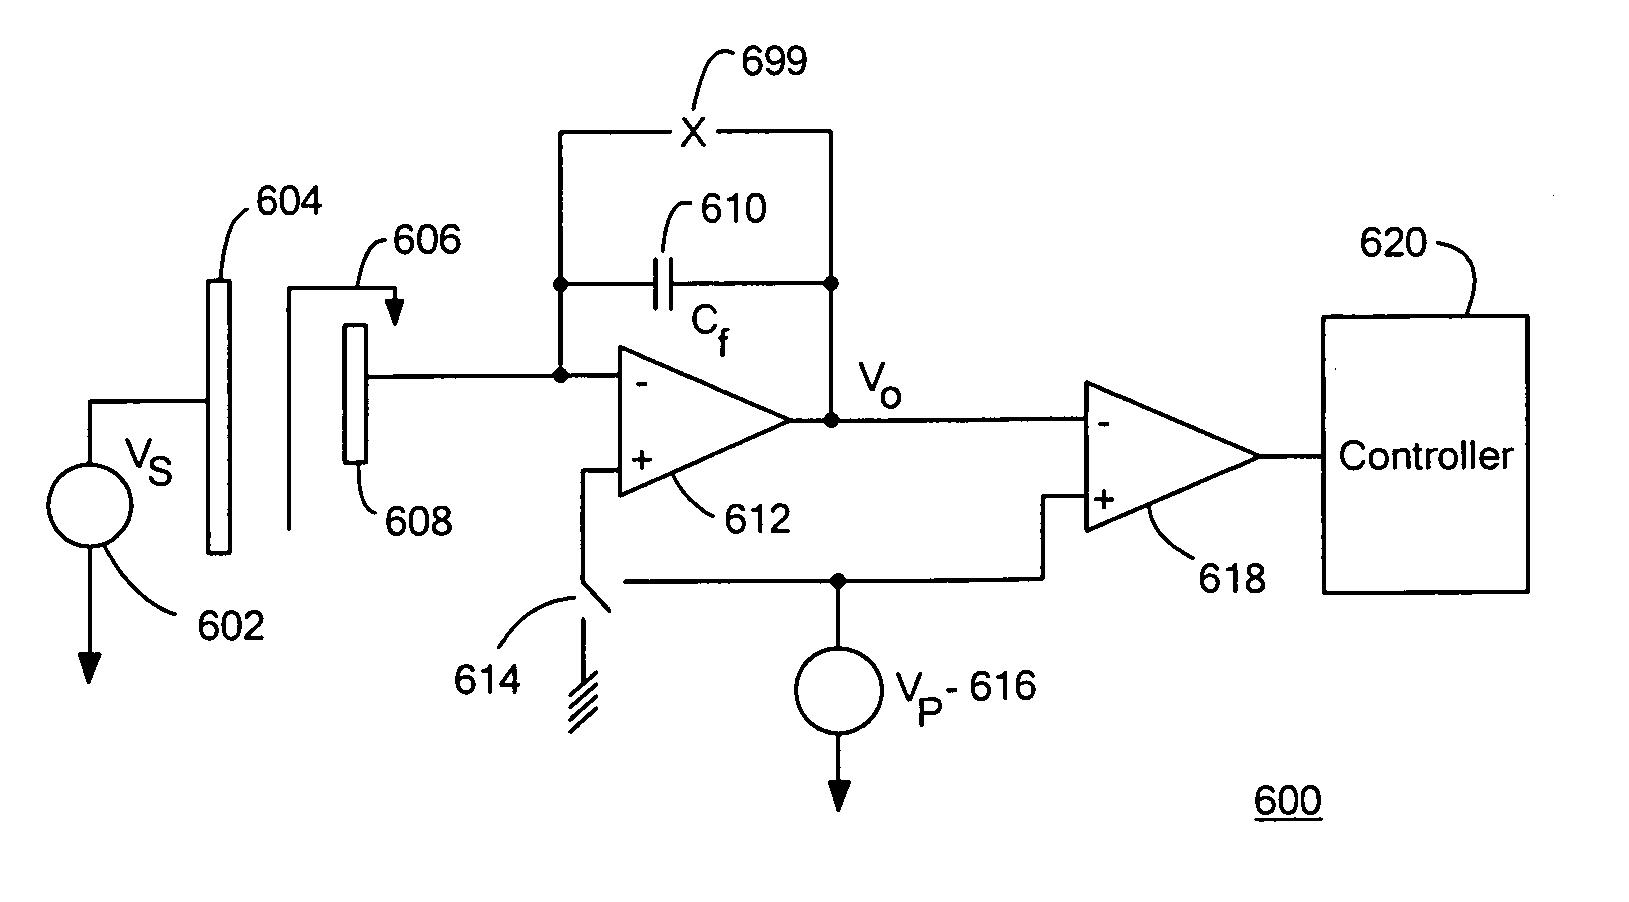 Non-contact high-voltage electrometer architecture with low-voltage feedback